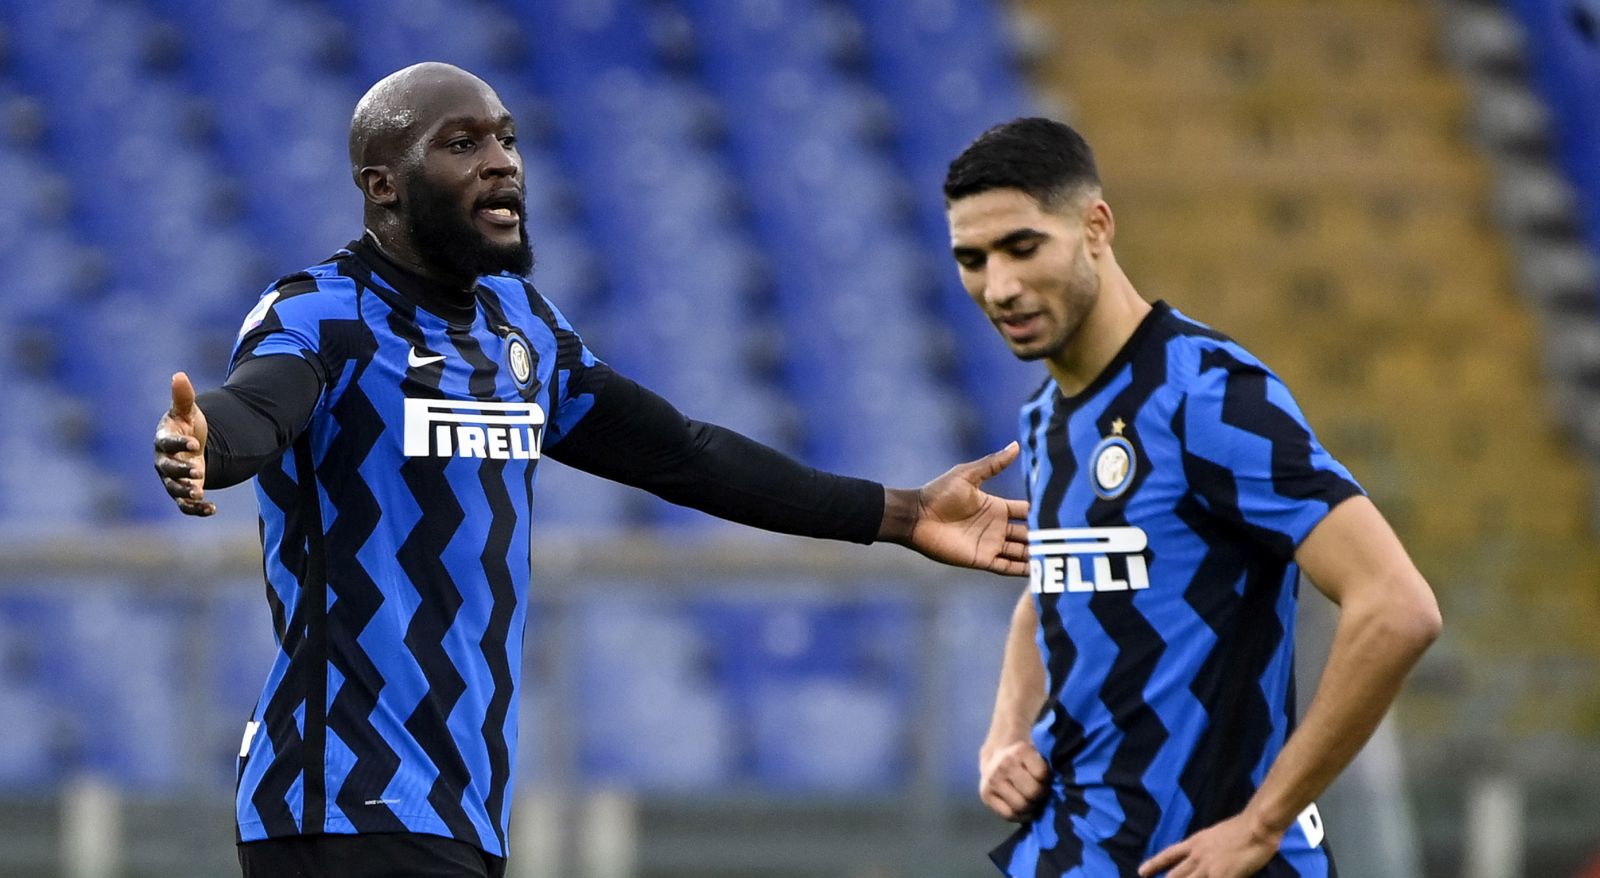 epa08930118 Inter's Romelu Lukaku (L) remostrates with the referee during the Italian Serie A soccer match between AS Roma and FC Inter at the Olimpico stadium in Rome, Italy, 10 January 2021.  EPA/RICCARDO ANTIMIANI